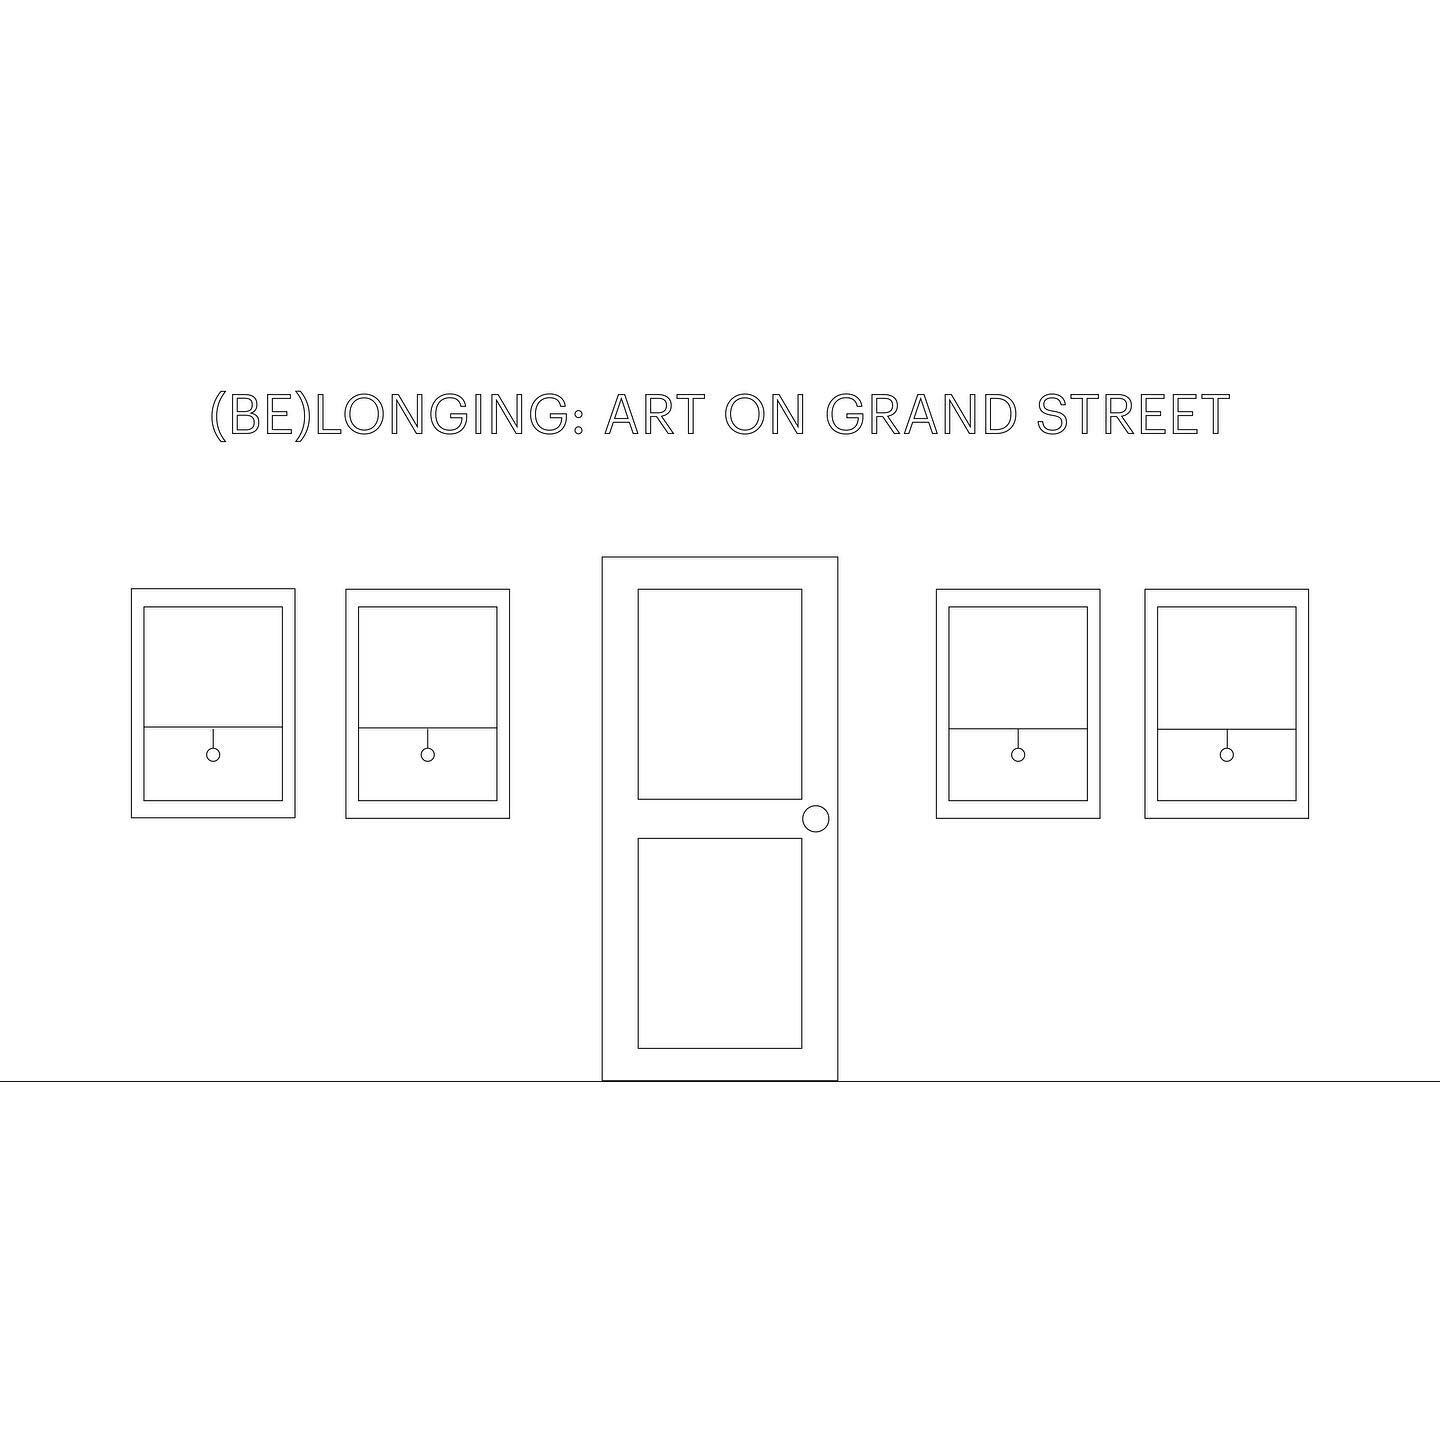 coming soon to a window near you&hellip;

so pleased to announce that I will have two new pieces in (be)longing: Art on Grand Street, an art exhibition activating windows on Grand Street from June 29th - July 23rd, curated by @sleepwhenimded 

openin